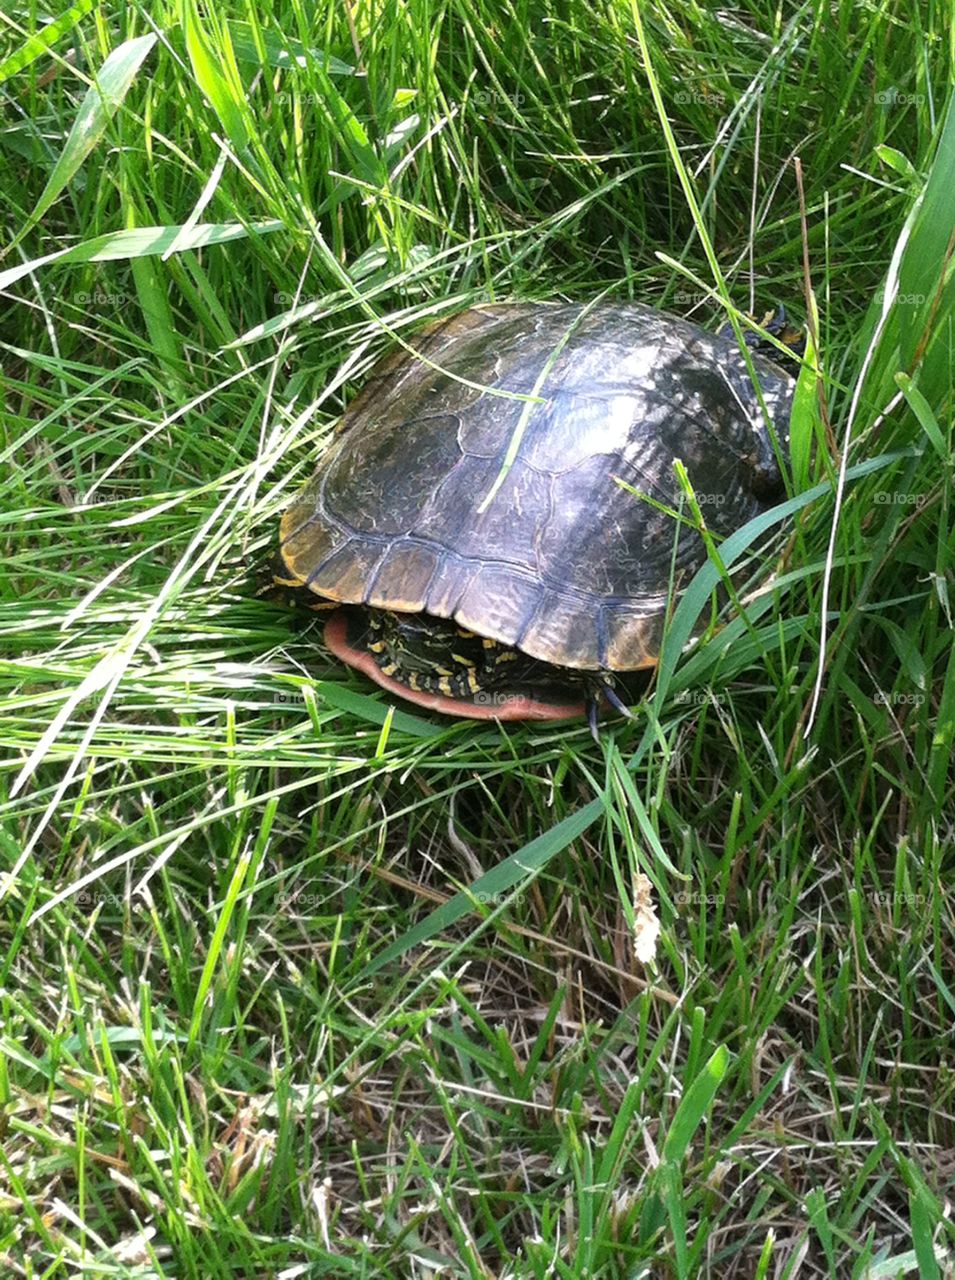 Turtle in its shell hiding in a grove of green grass